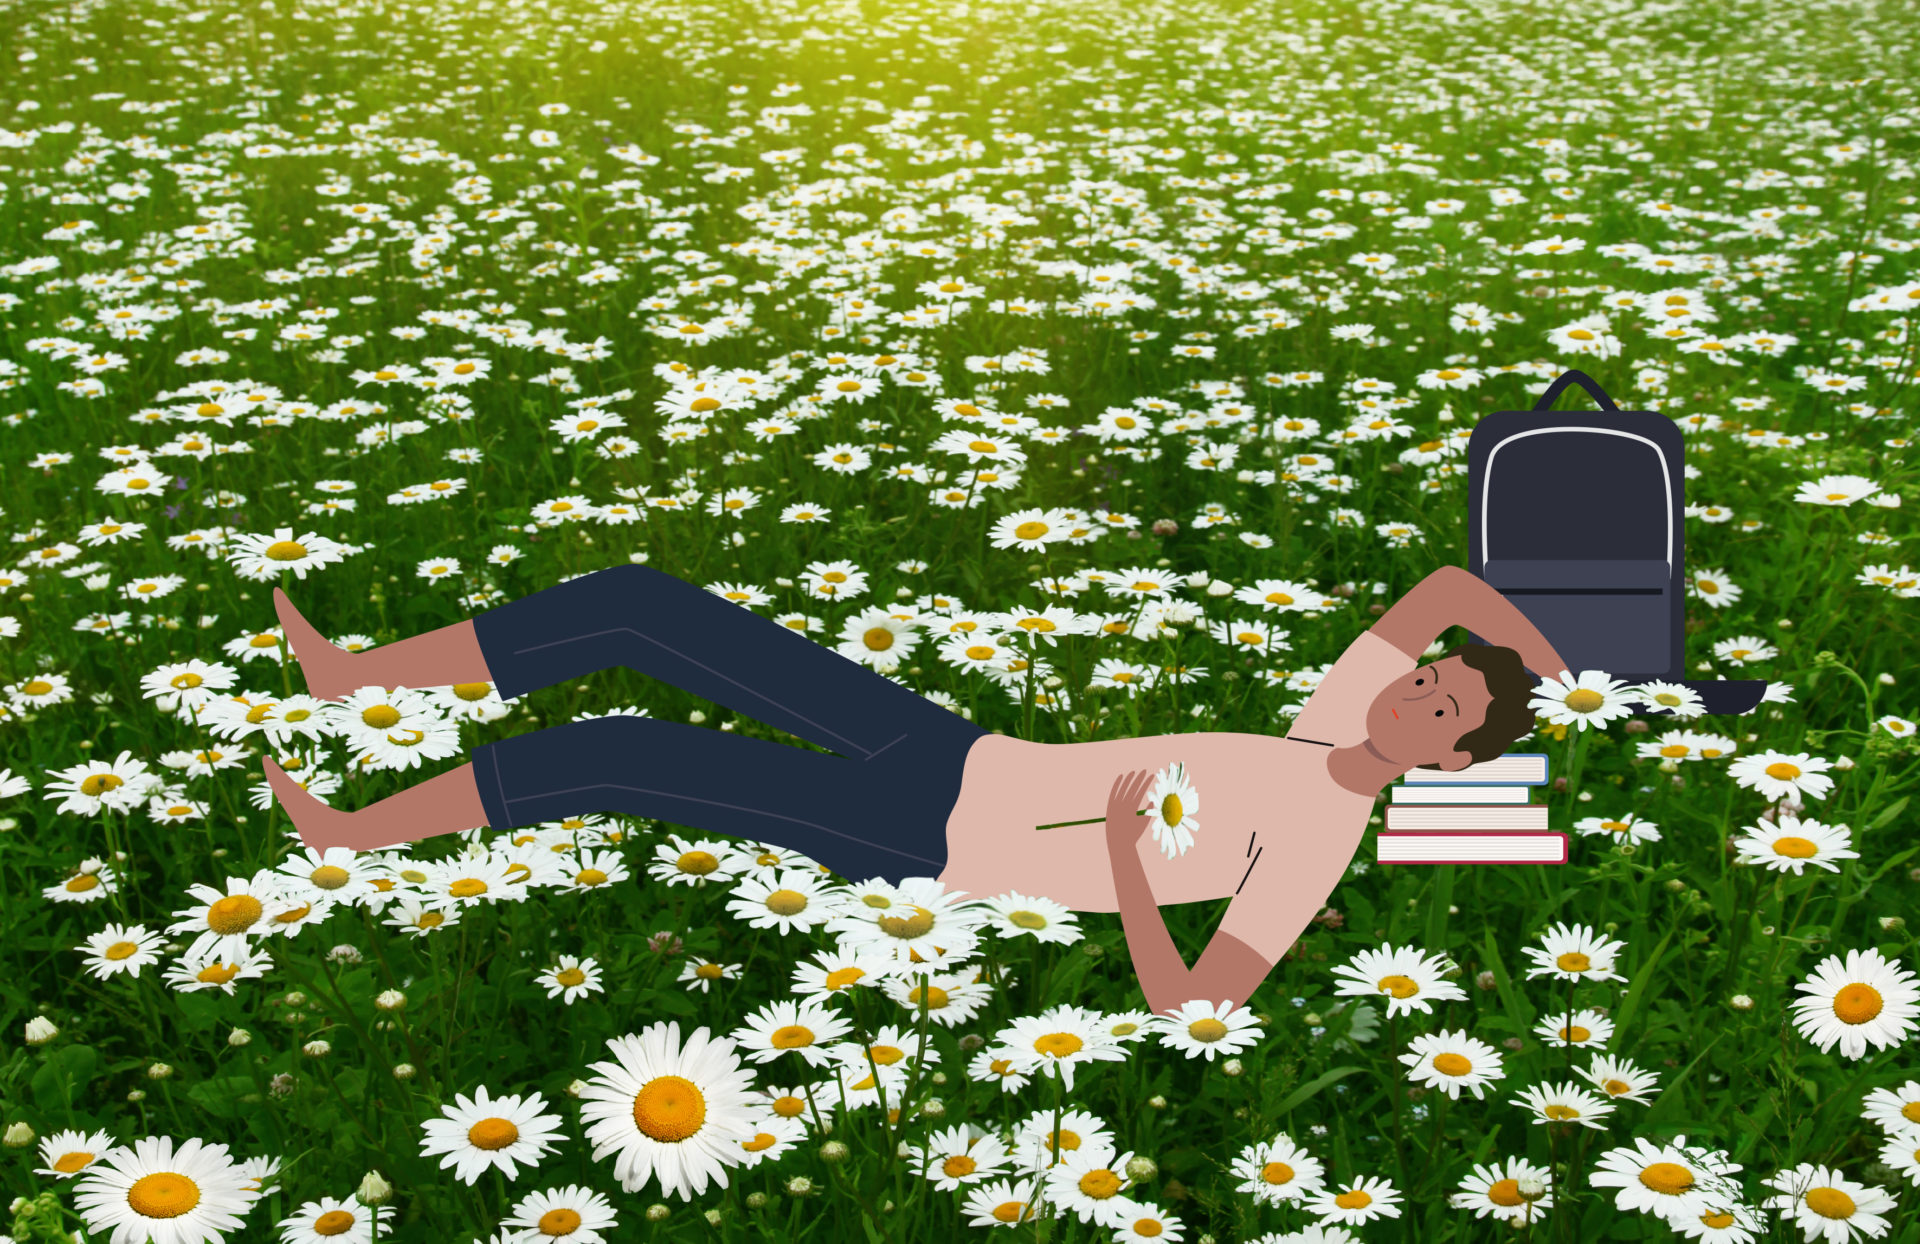 A young person lying in a field of flowers. They are holding a flower and resting their head on a pile of books. There is a backpack in the grass behind them. They are looking up into the sky with a relaxed expression on their face.